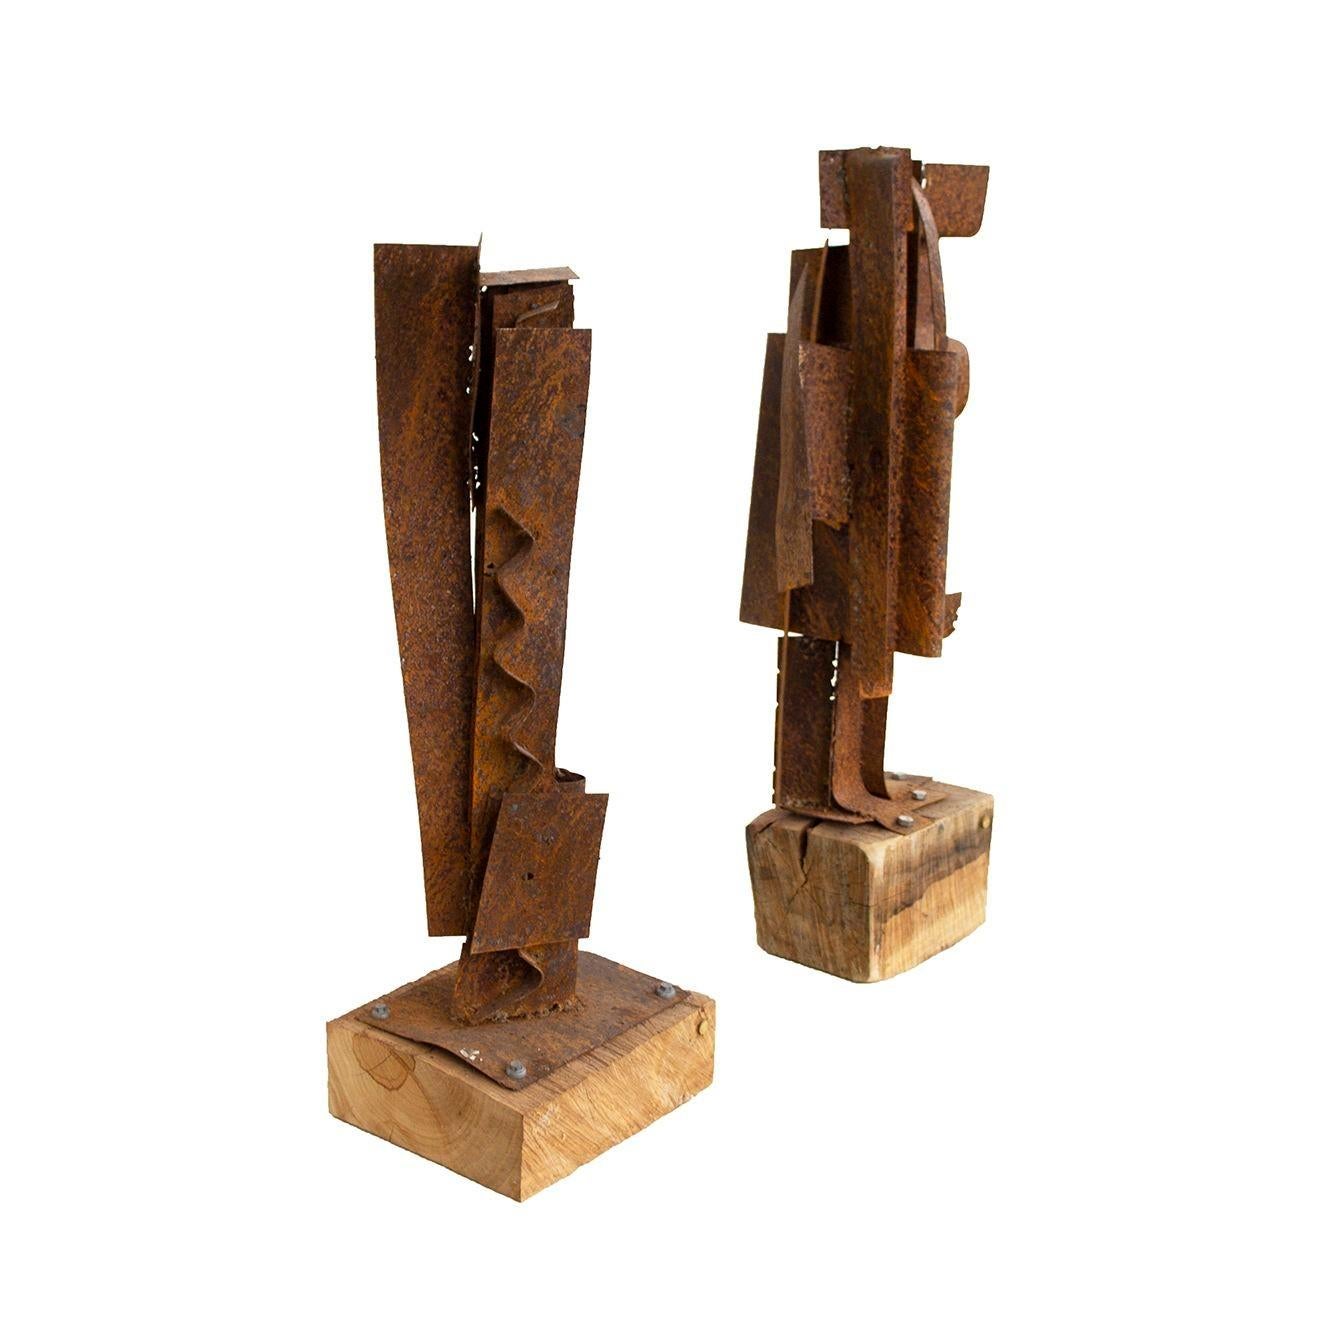 Pair of handmade sculptures by American artist PKW. Rusted steel mounted into a solid fallen wood base. Signed on bases. As a pair they are a great mismatched pair with excellent scale for display. 
DIMENSIONS
Sculpture 1 (larger)- base measures